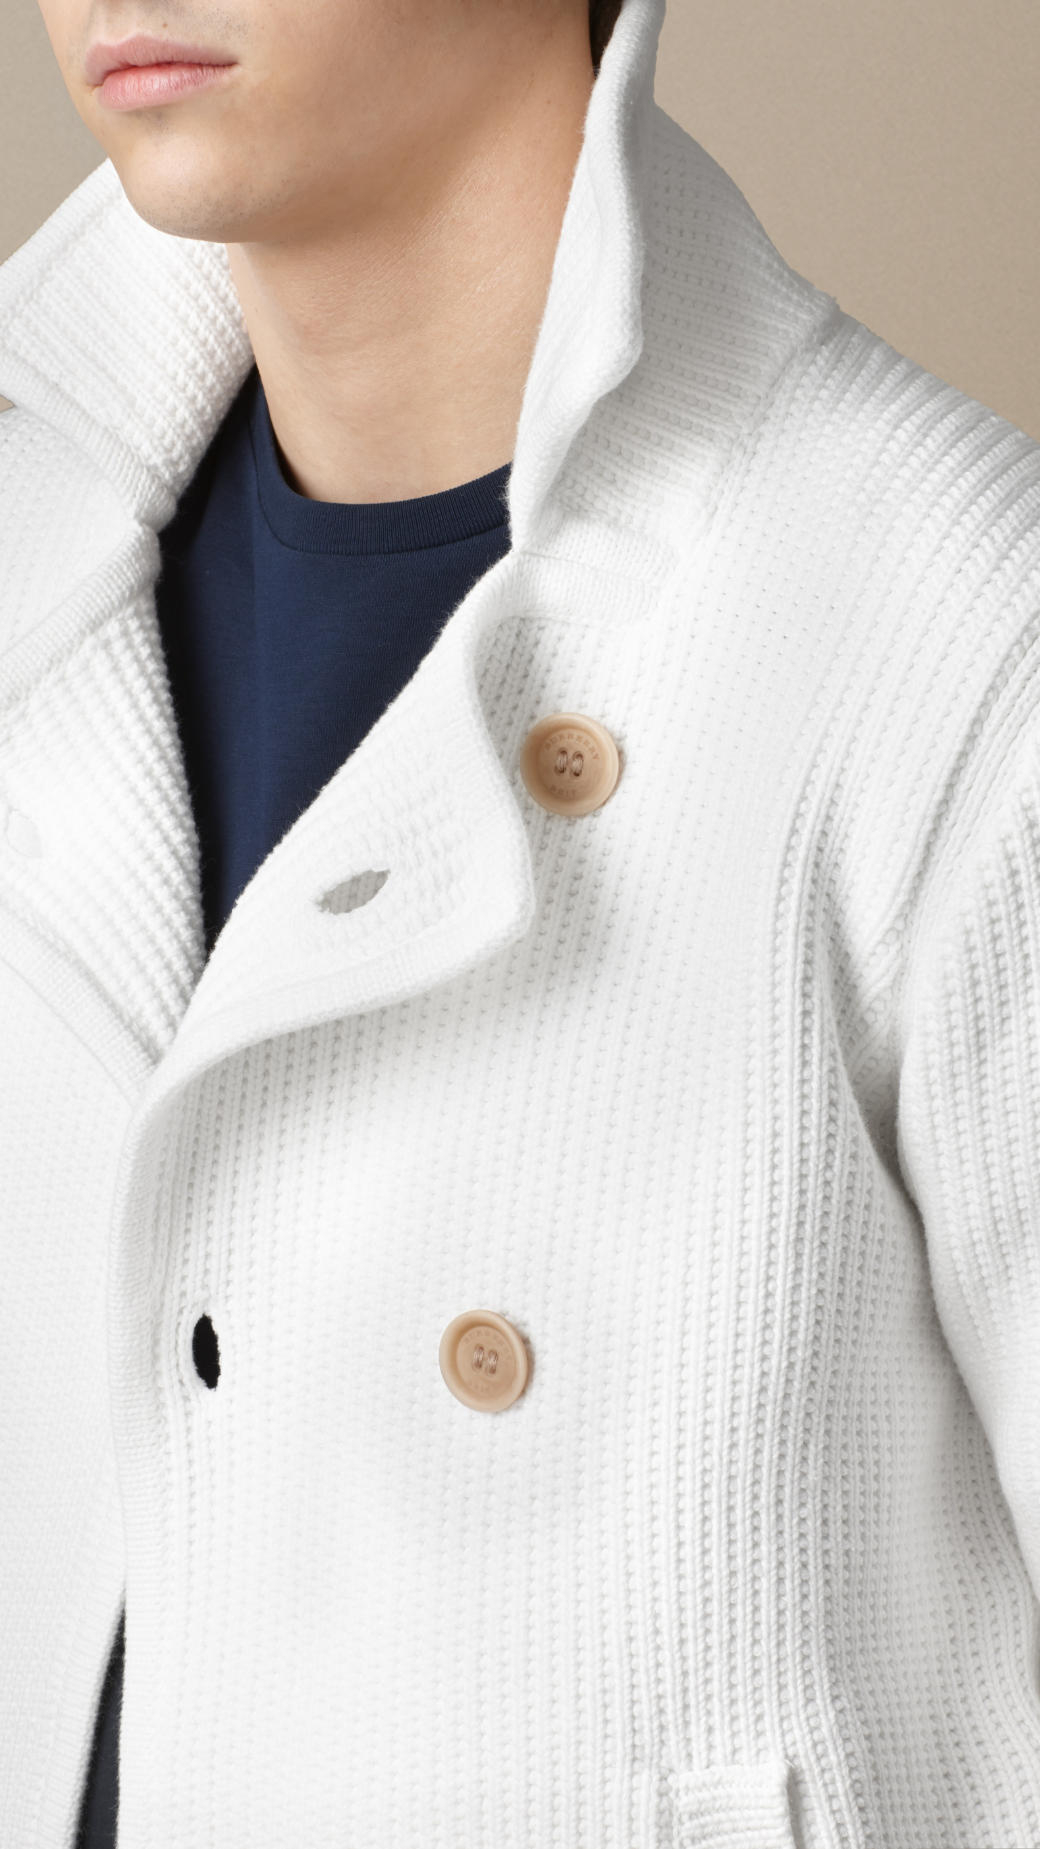 Lyst - Burberry Textured Knit Cotton Pea Coat in White for Men